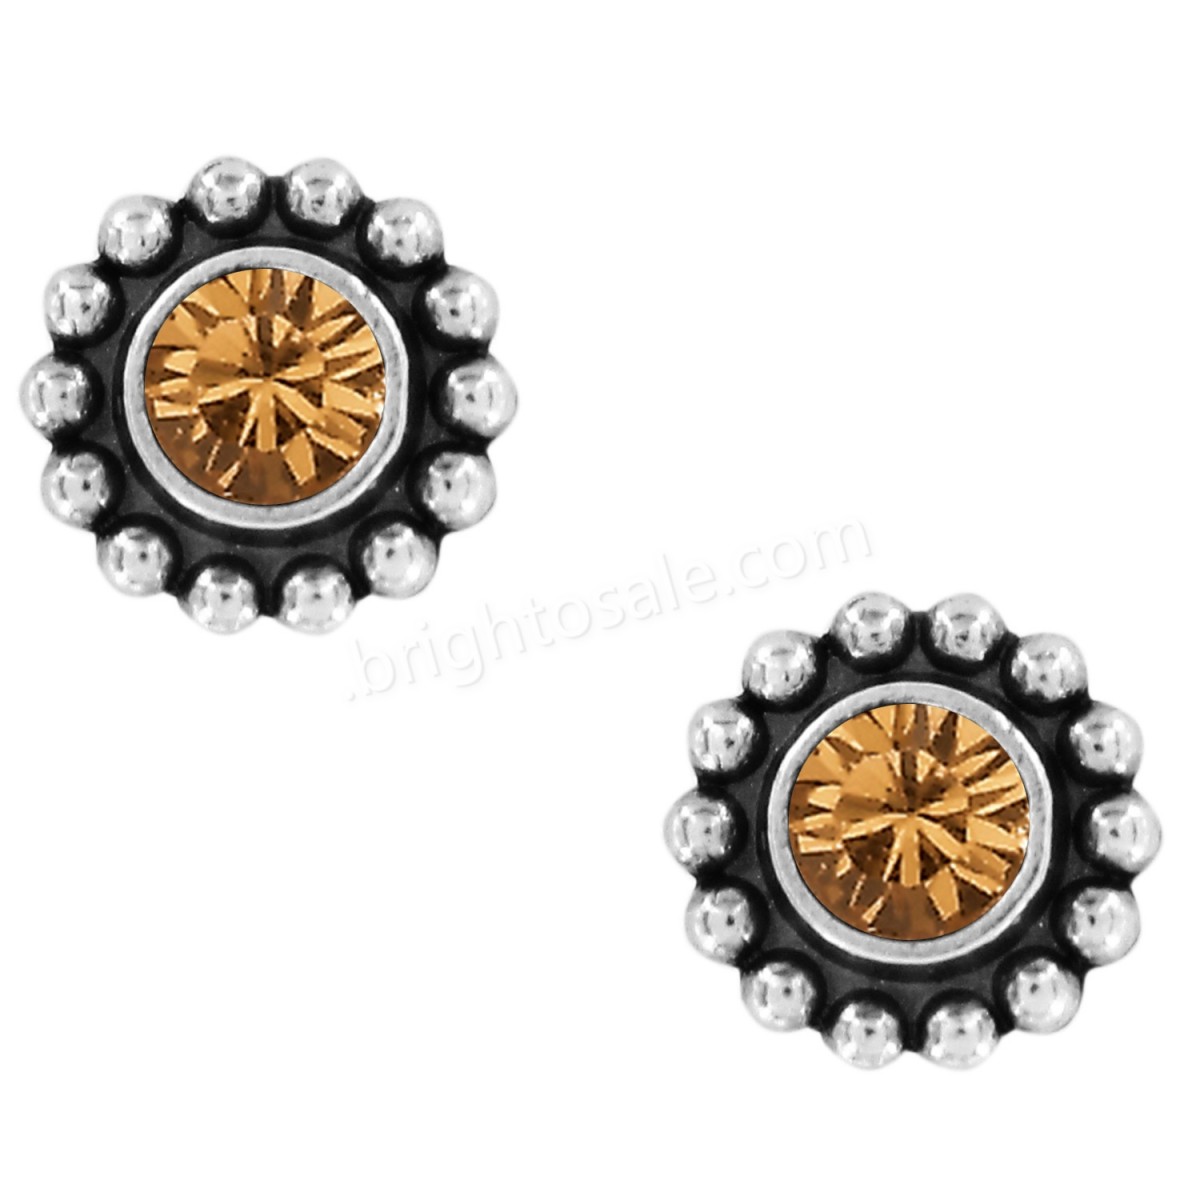 Brighton Collectibles & Online Discount Twinkle Mini Post Earrings - -13